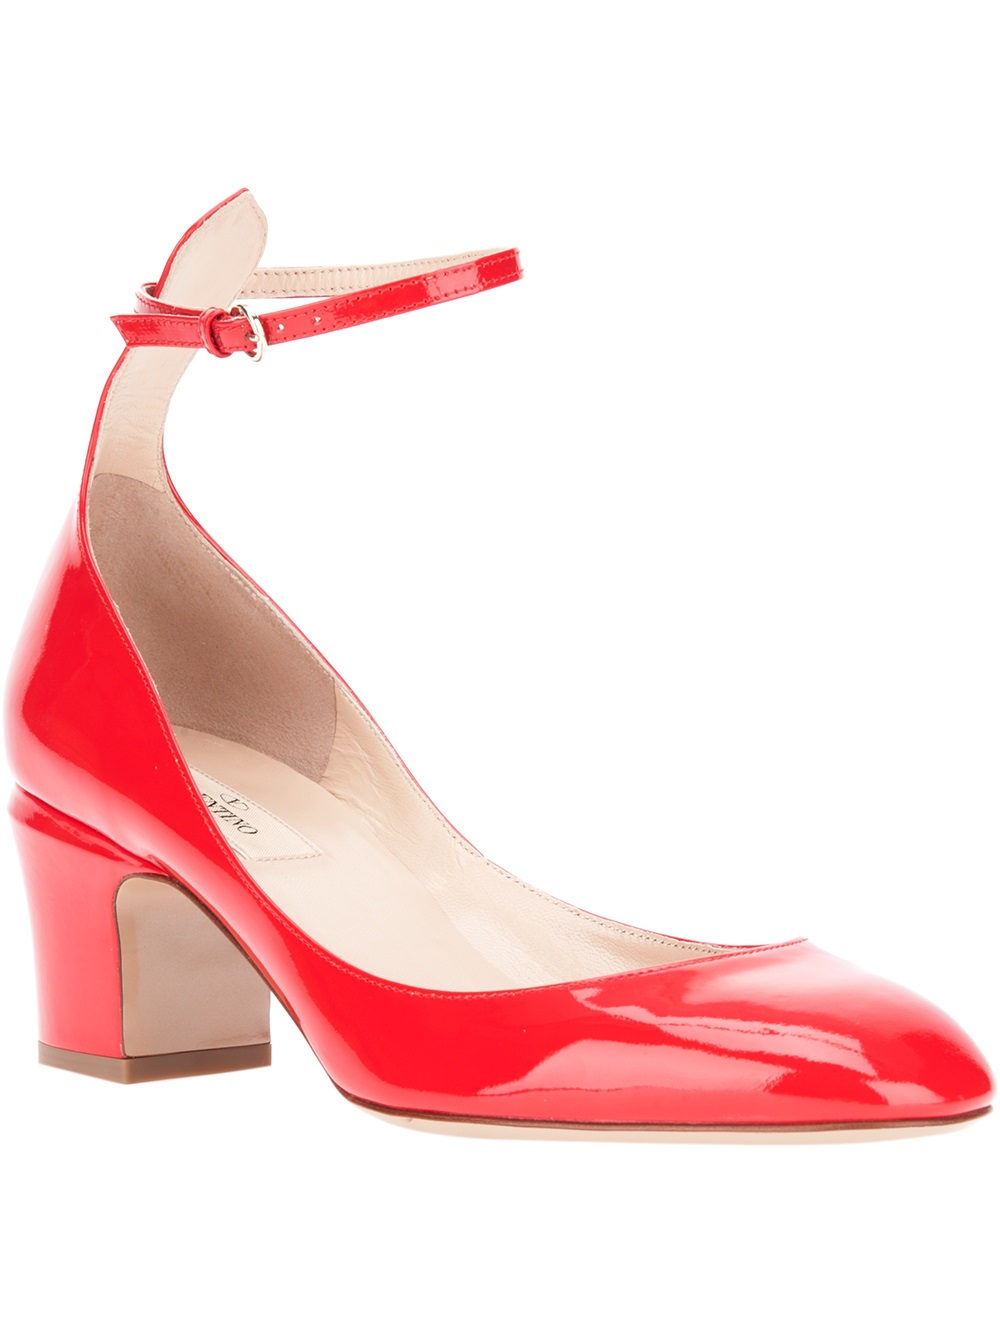 Lyst - Valentino Ankle Strap Pump in Red